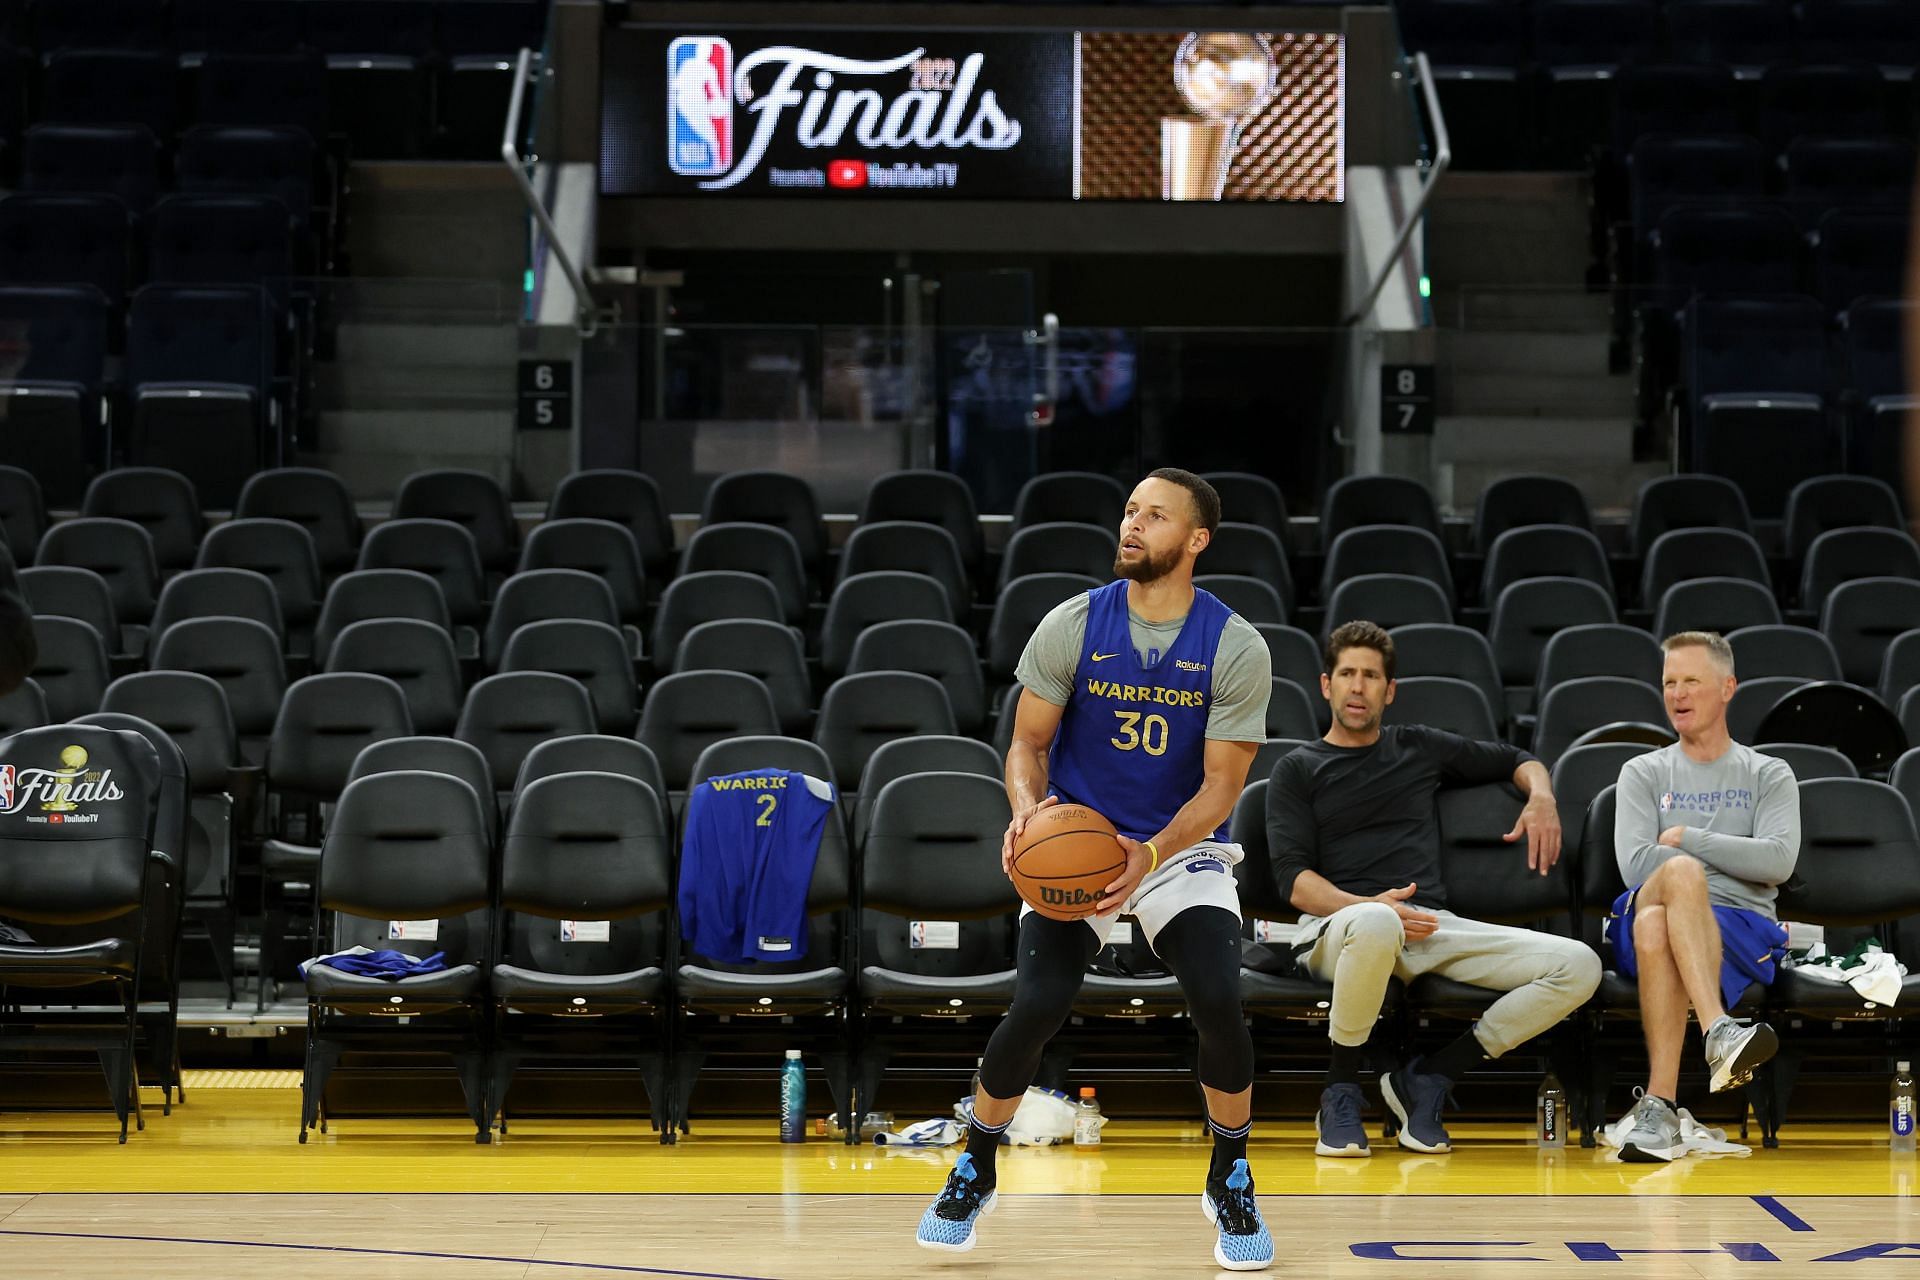 Warriors coach Steve Kerr looks on as Steph Curry goes through his routine during 2022 NBA Finals - Media Day